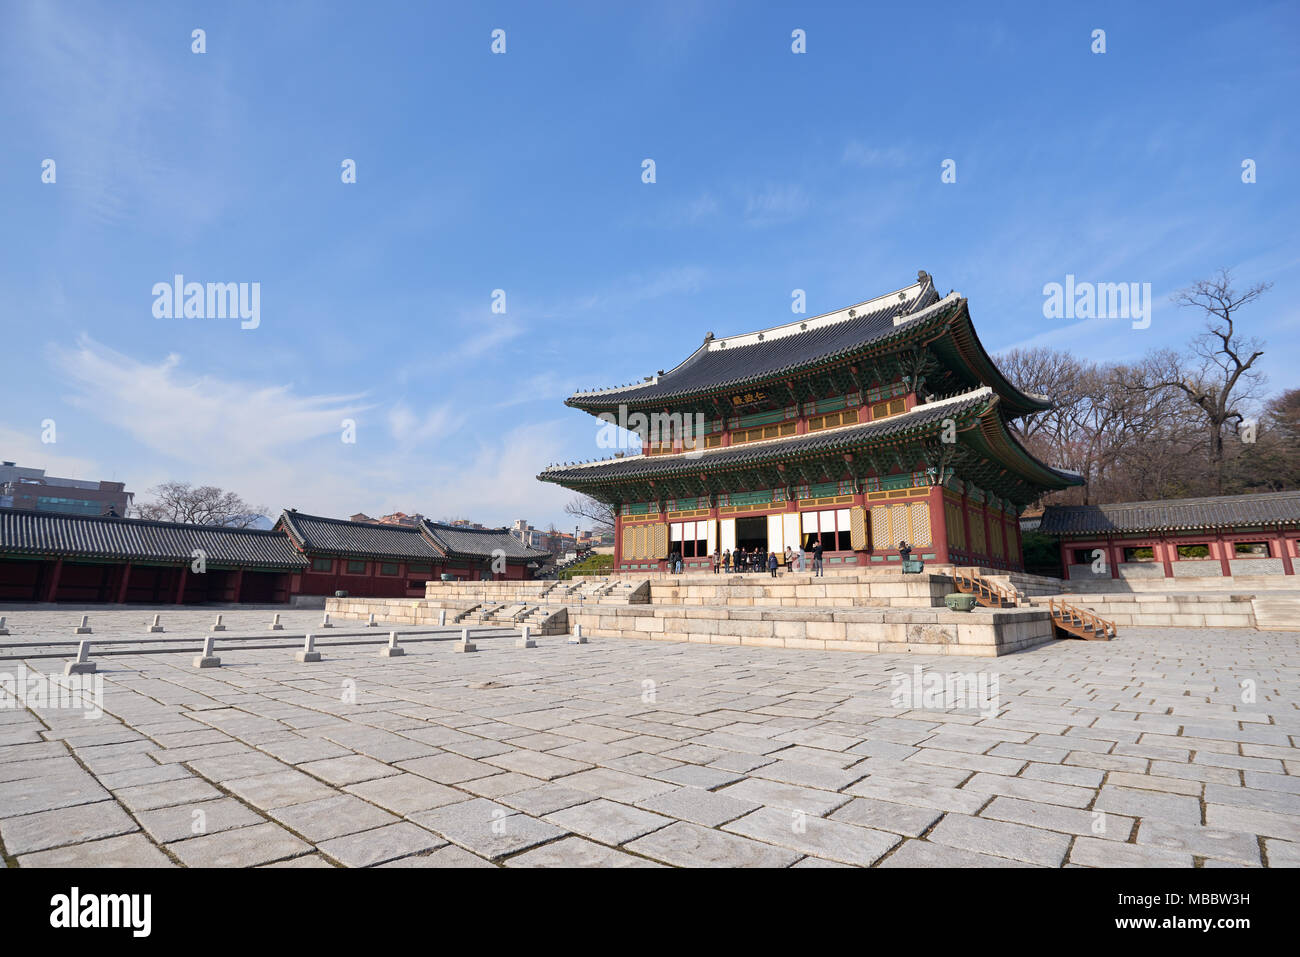 Seoul, Korea - December 9, 2015: Injeongjeon, the main hall of Changdeokgung. Changdeokgung is a palace built as a secondary palace of the Joseon dyna Stock Photo